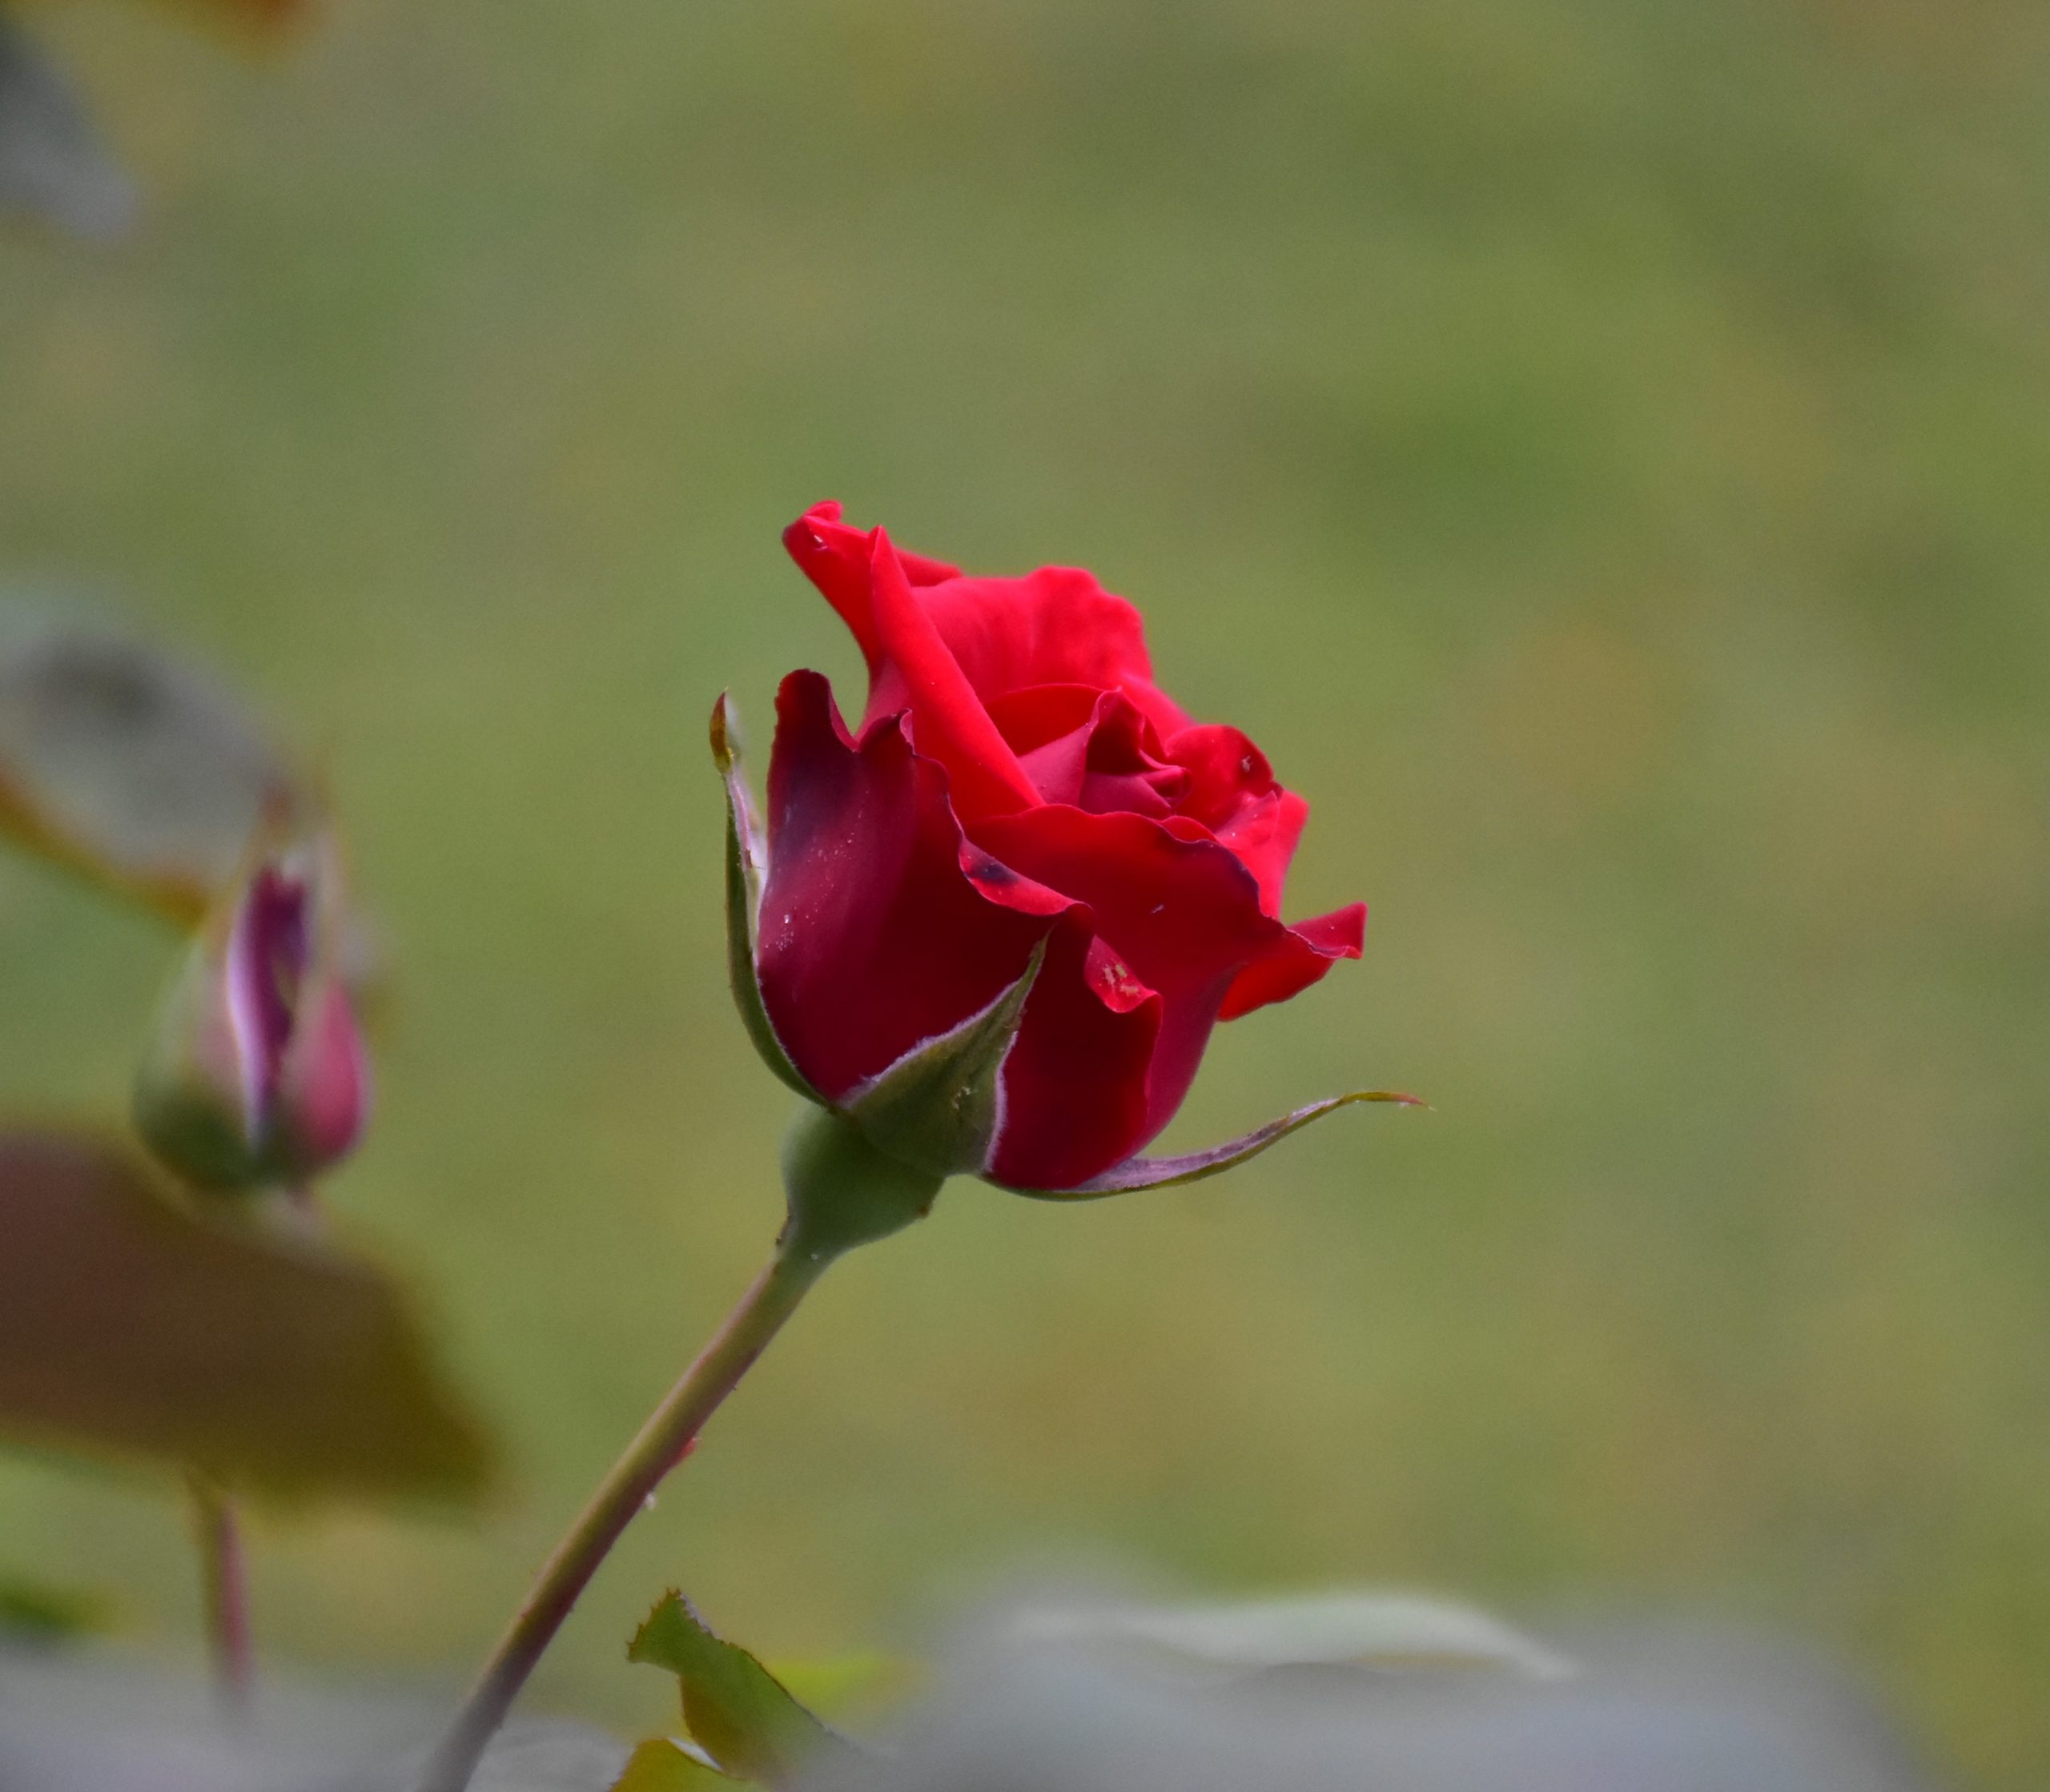 A red rose plant